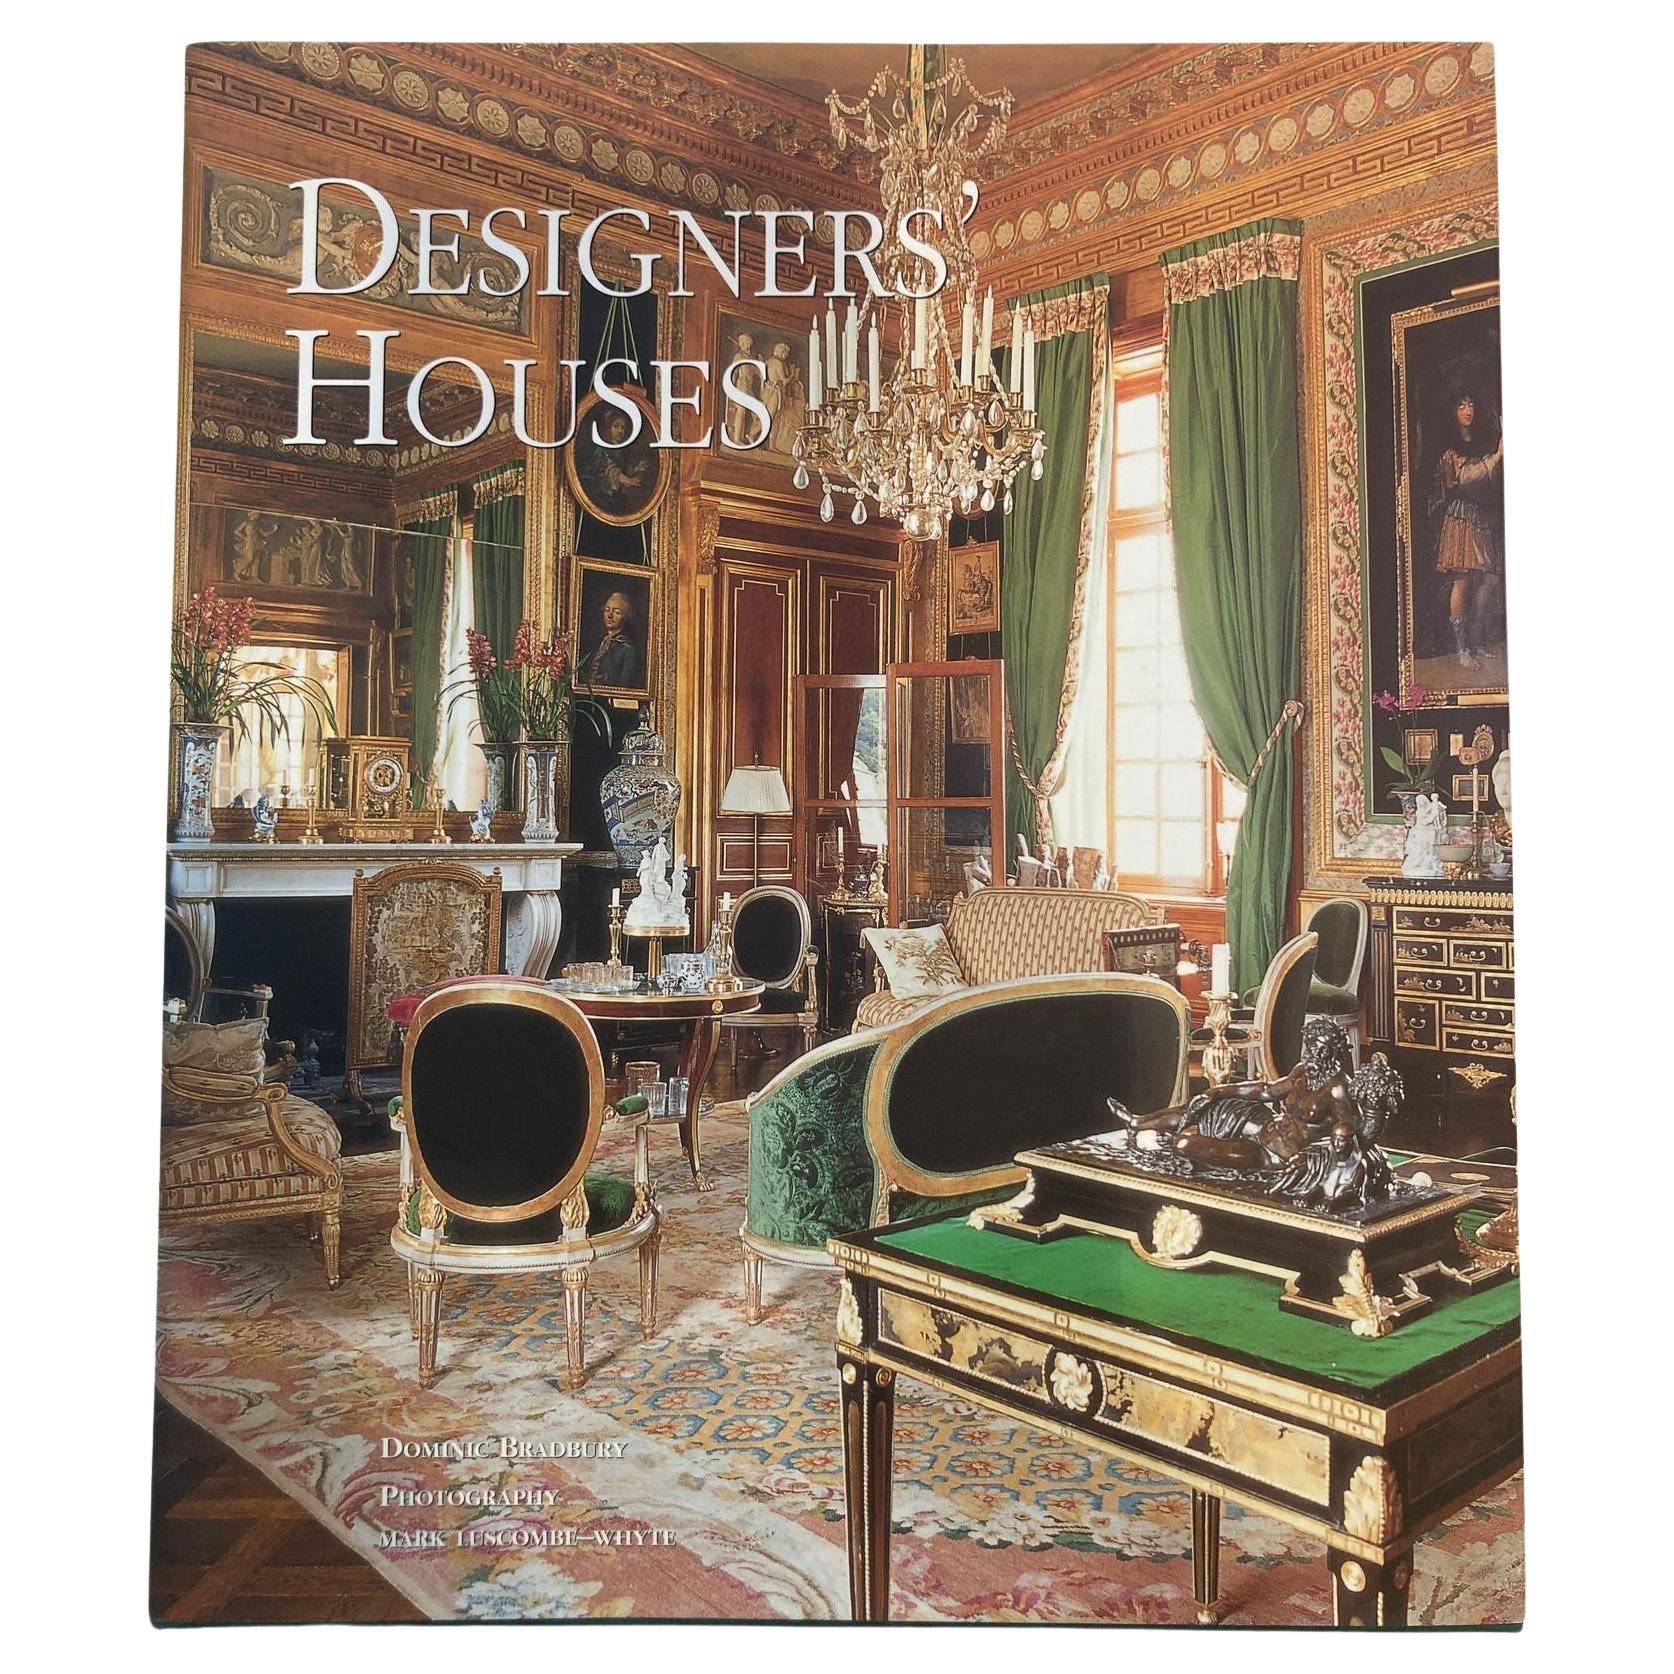 Designers' Houses Hardcover book First Edition By Dominic Bradbury 2001